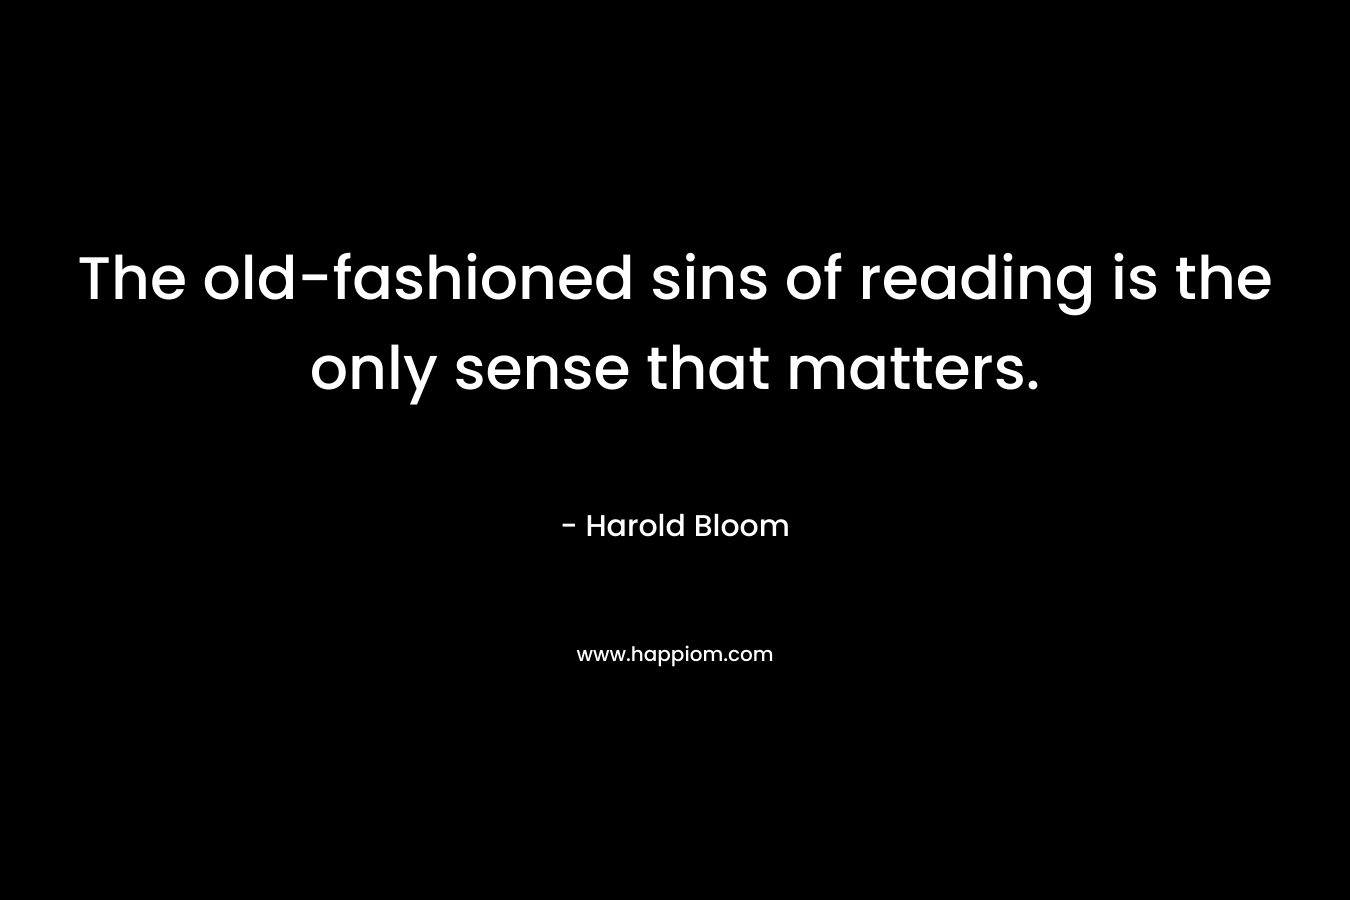 The old-fashioned sins of reading is the only sense that matters.